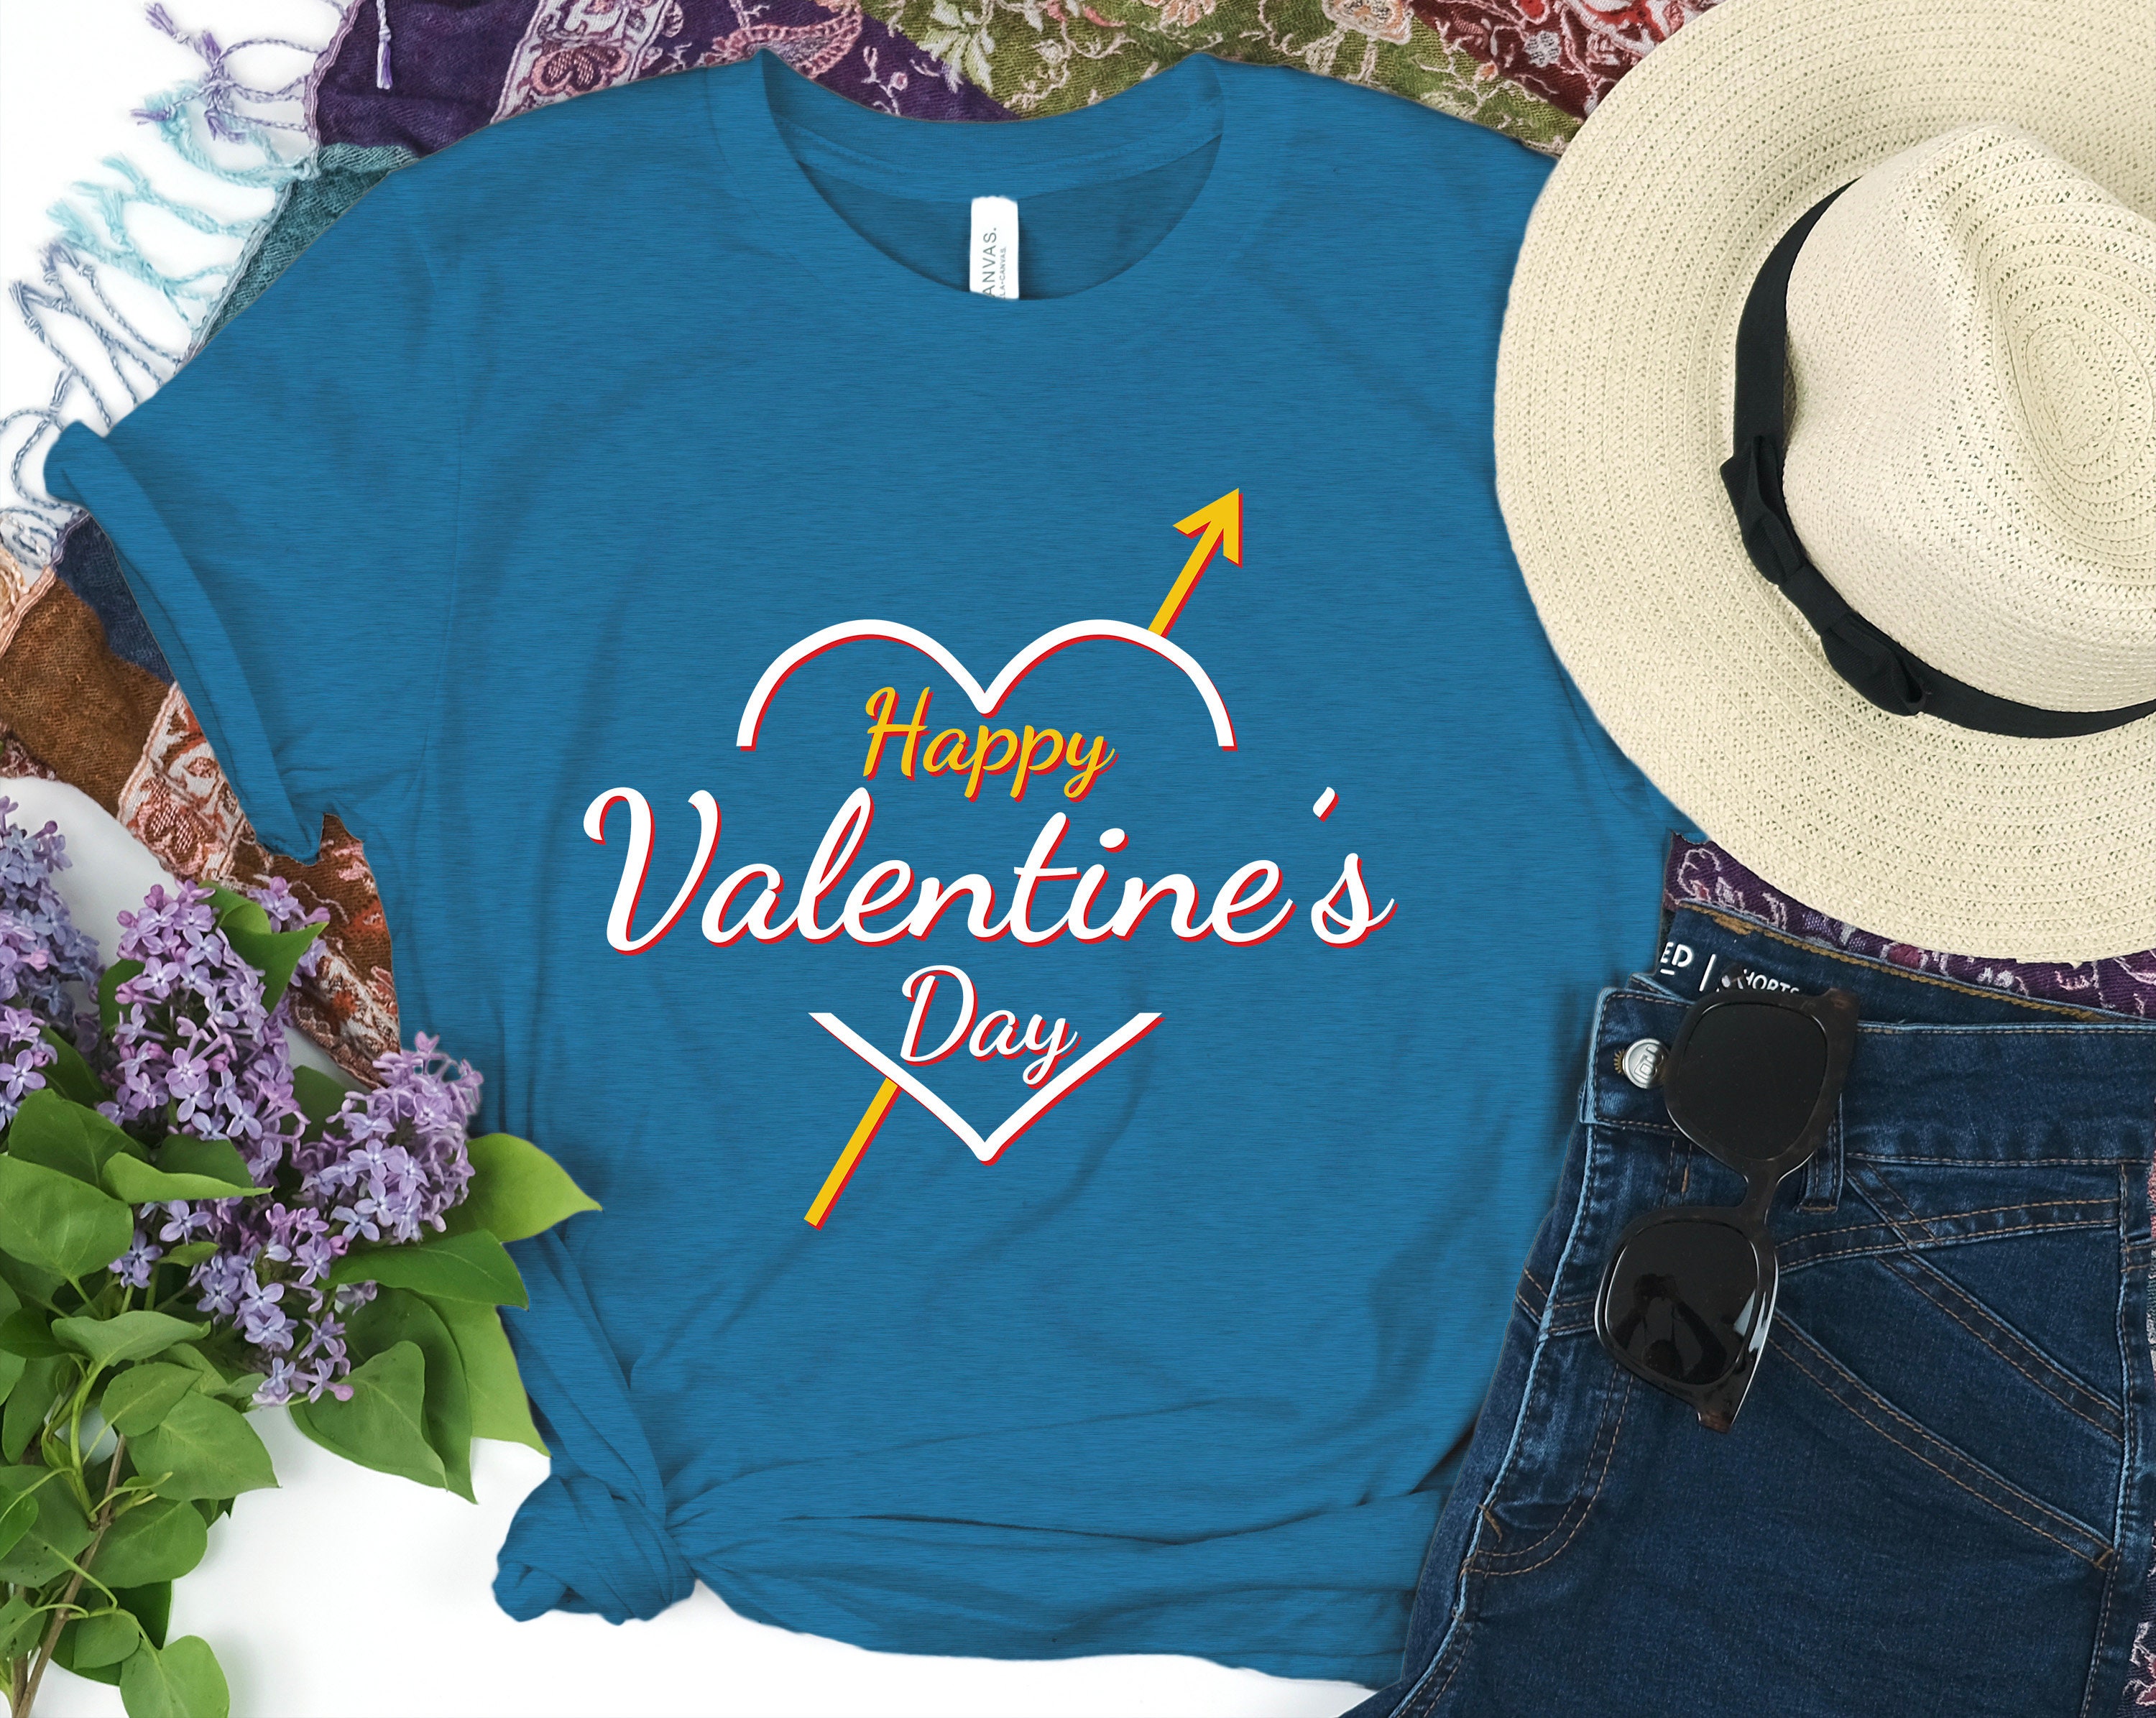 Valentines Day Ideas valentines day quotes valentines day for him gift for  valentine day Essential T-Shirt by show4store